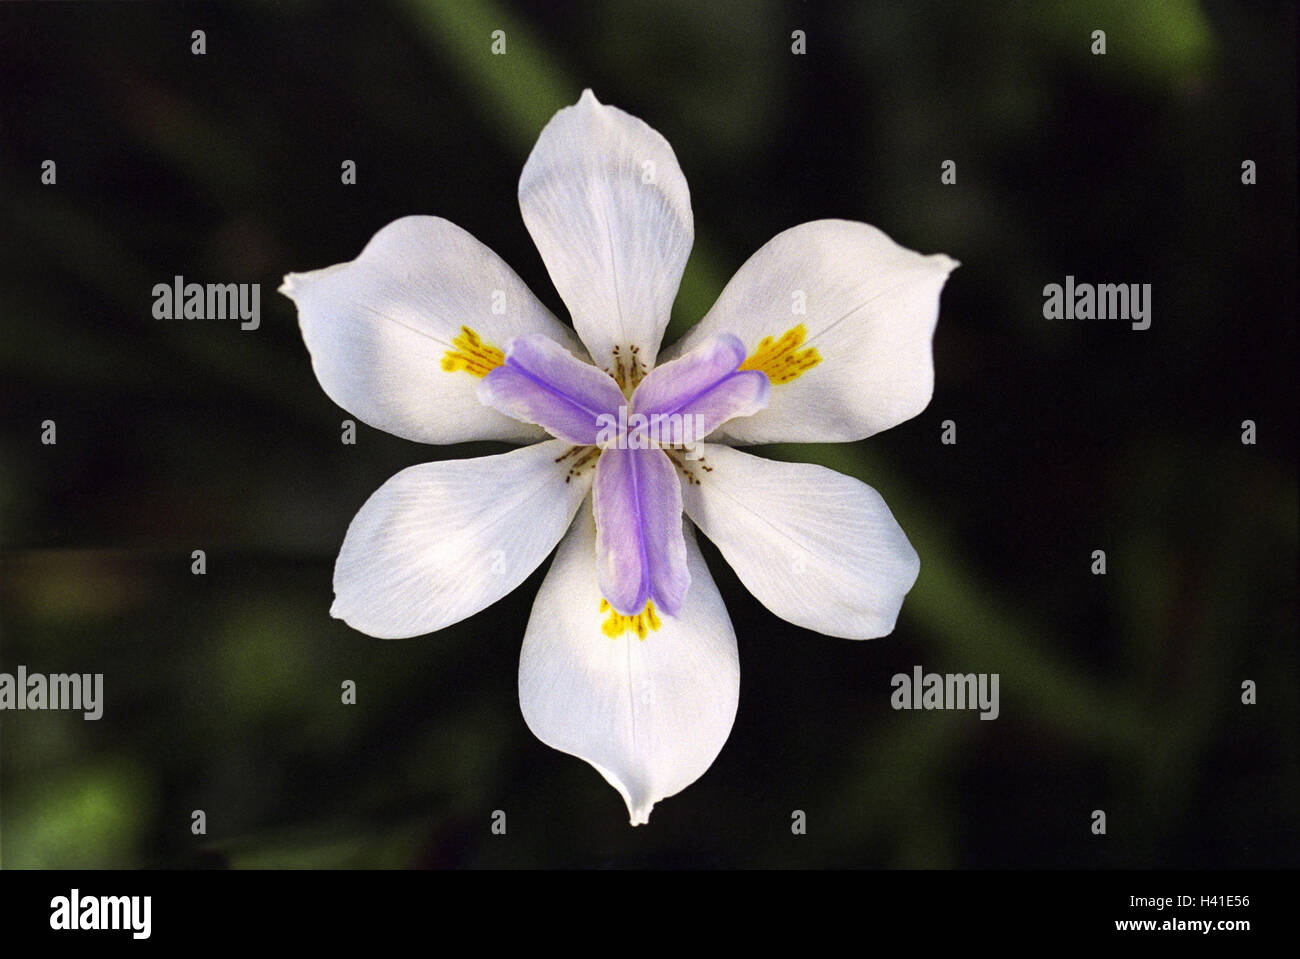 Flower, detail, blossom, Neomarica spec., iris plant, Neomarica gracilis, Iridaceae, plants, plant, flower head, petals, fruit stamps, nature, botany, cleanness, beauty, odour, symmetry Stock Photo